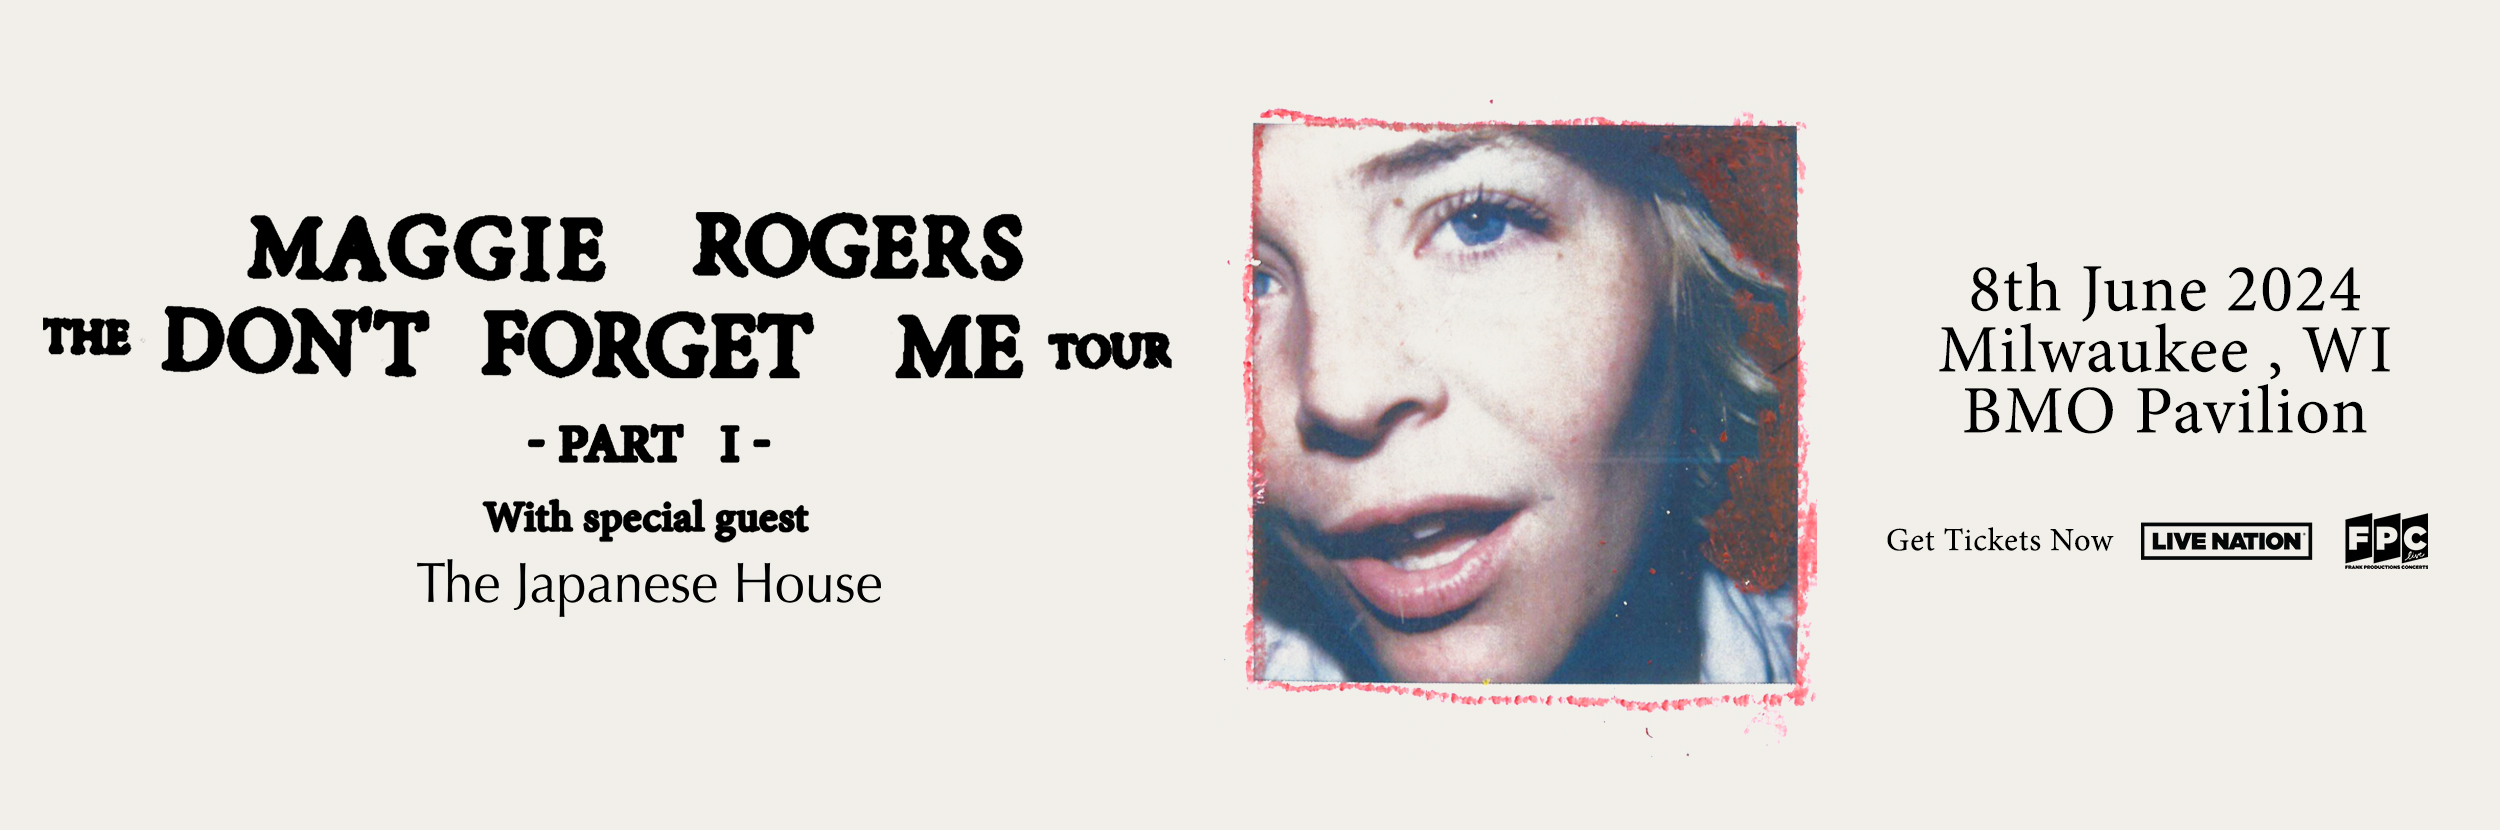 Maggie Rogers June 8 at BMO Pavilion